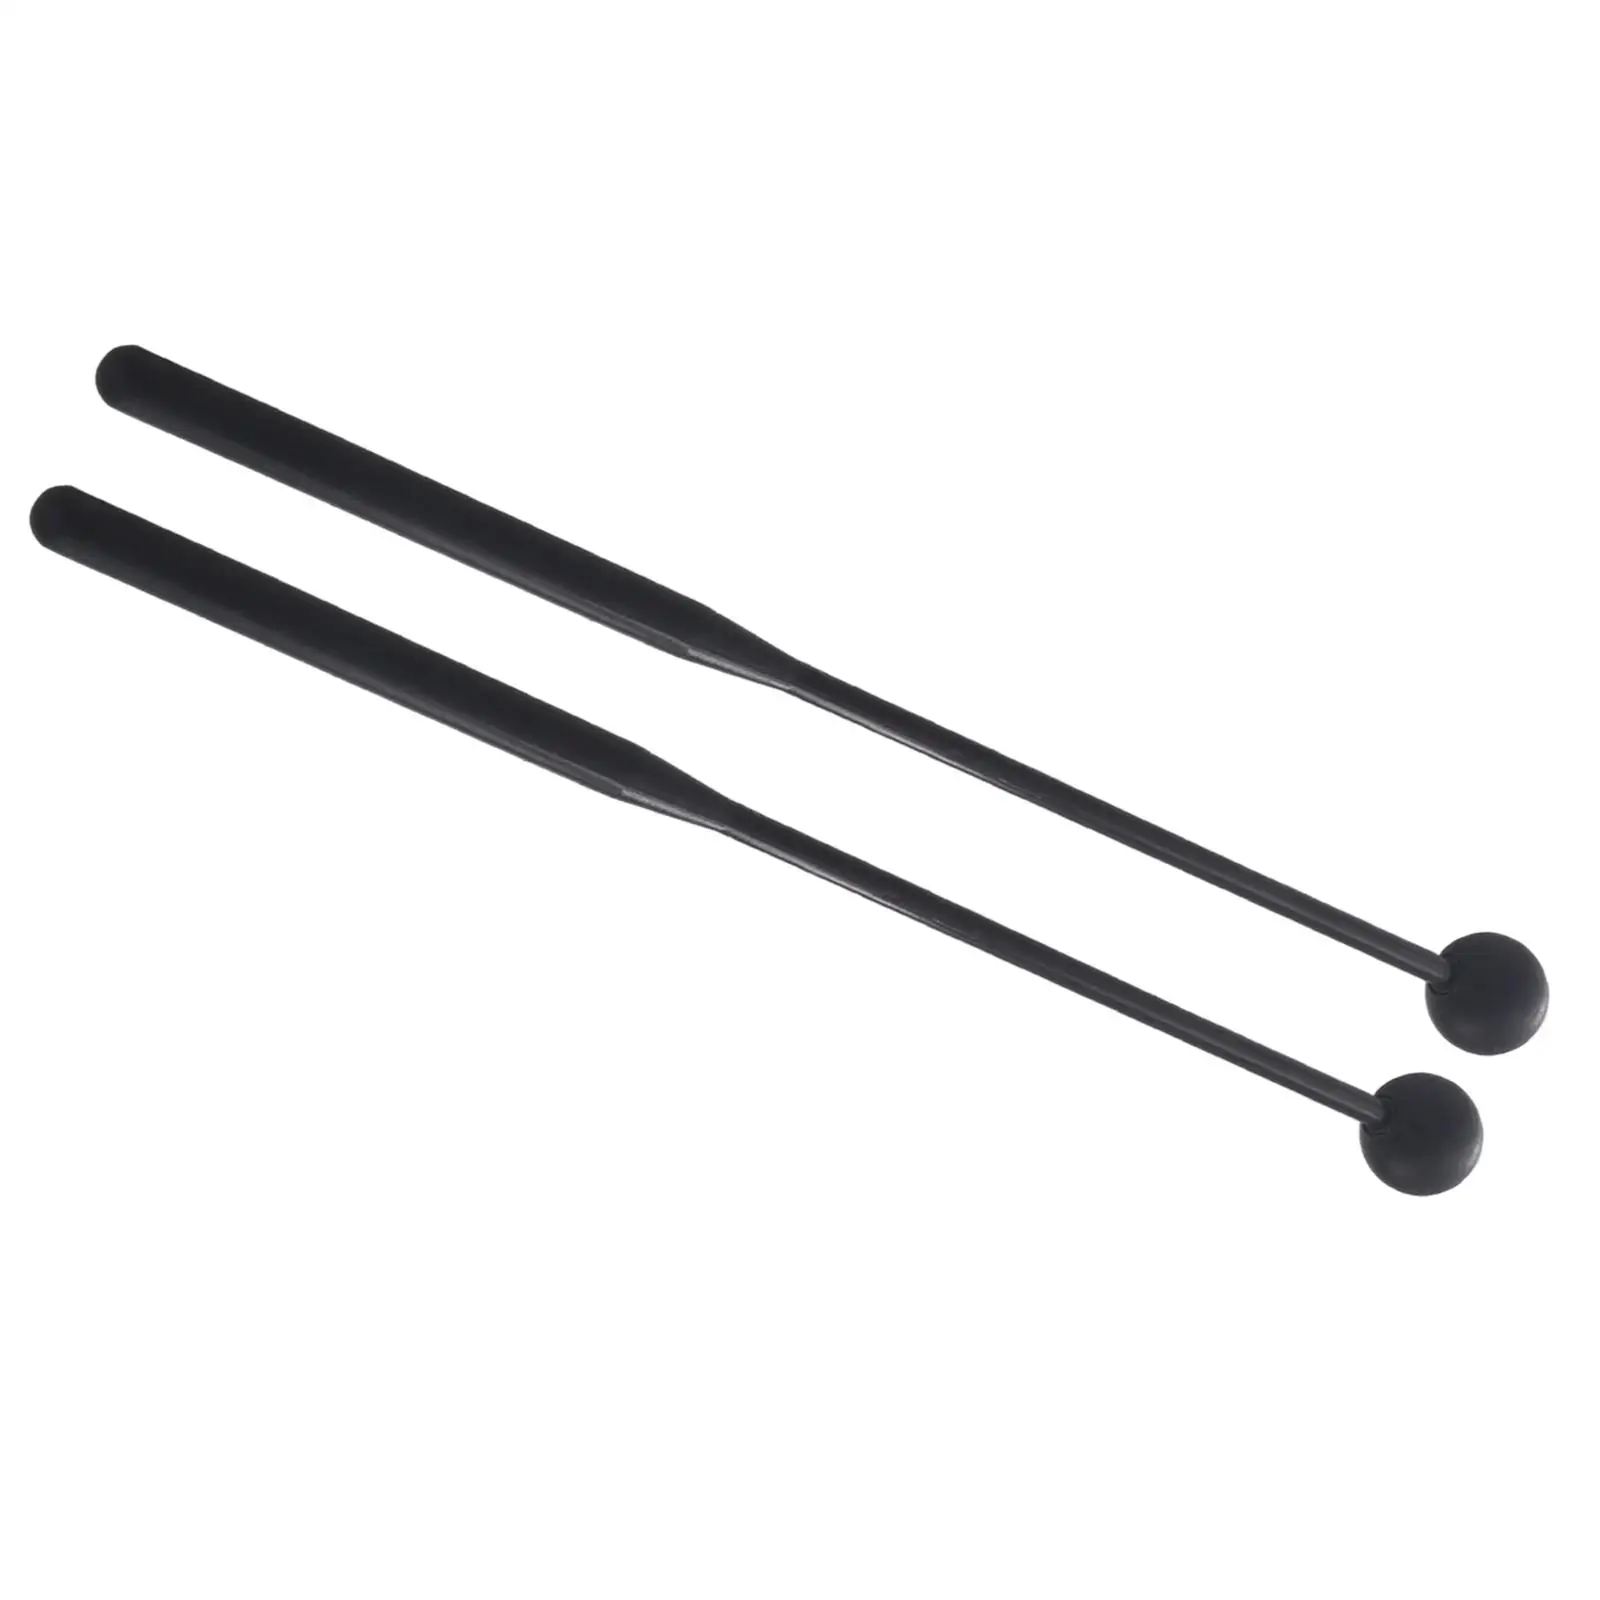 2x Percussion Xylophone Mallets 12`` for Timpani Music Education Meditation